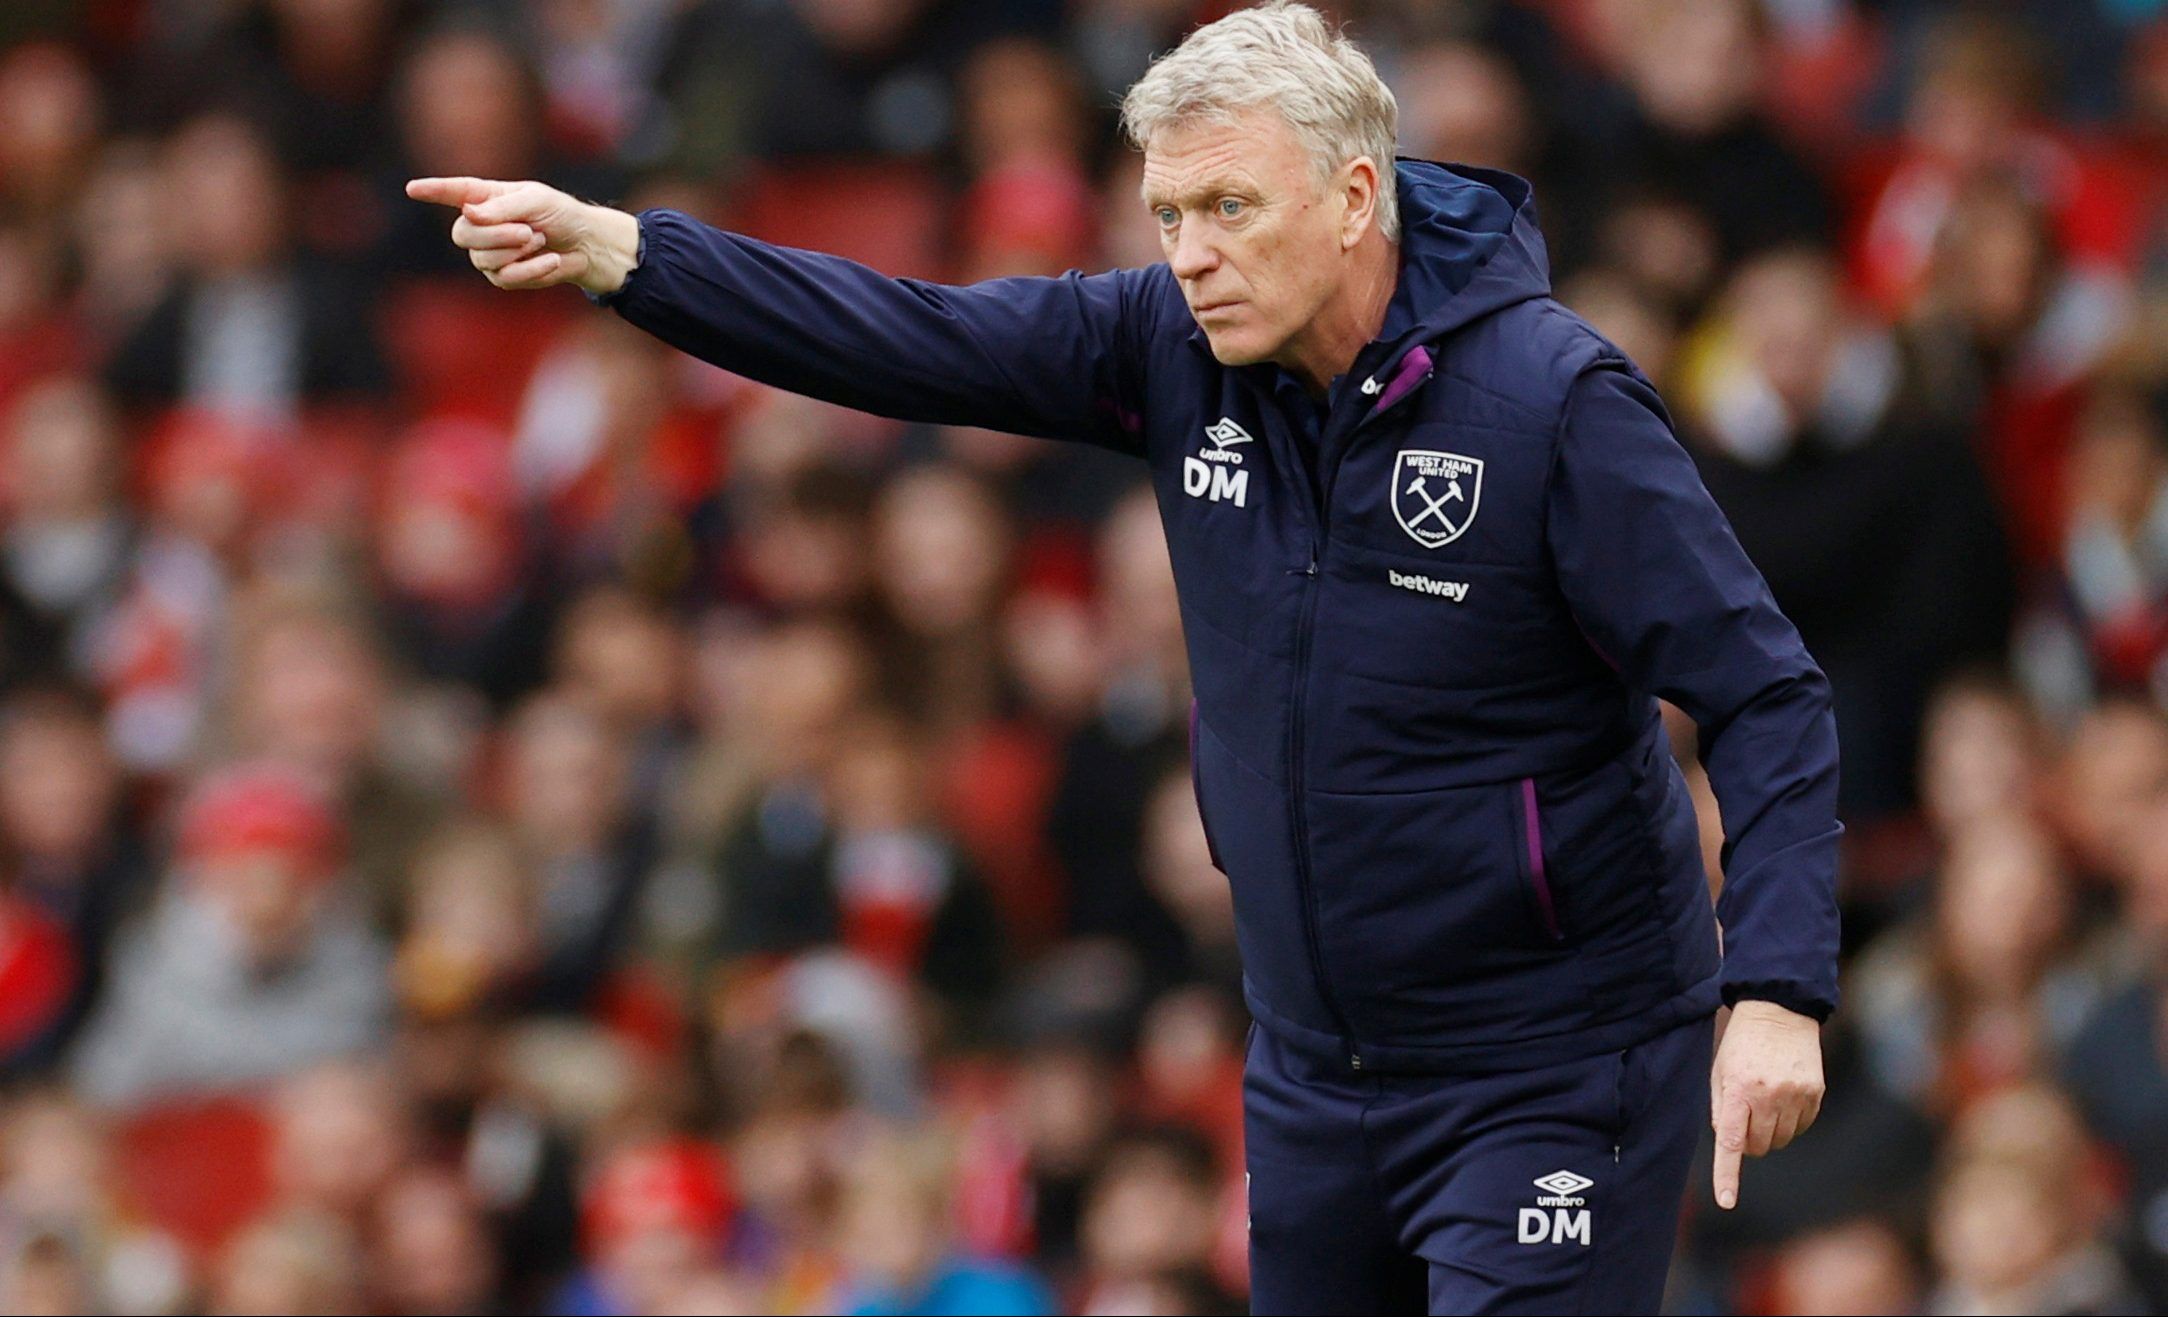 Soccer Football - Premier League - Arsenal v West Ham United - Emirates Stadium, London, Britain - March 7, 2020  West Ham United manager David Moyes   Action Images via Reuters/John Sibley  EDITORIAL USE ONLY. No use with unauthorized audio, video, data, fixture lists, club/league logos or 